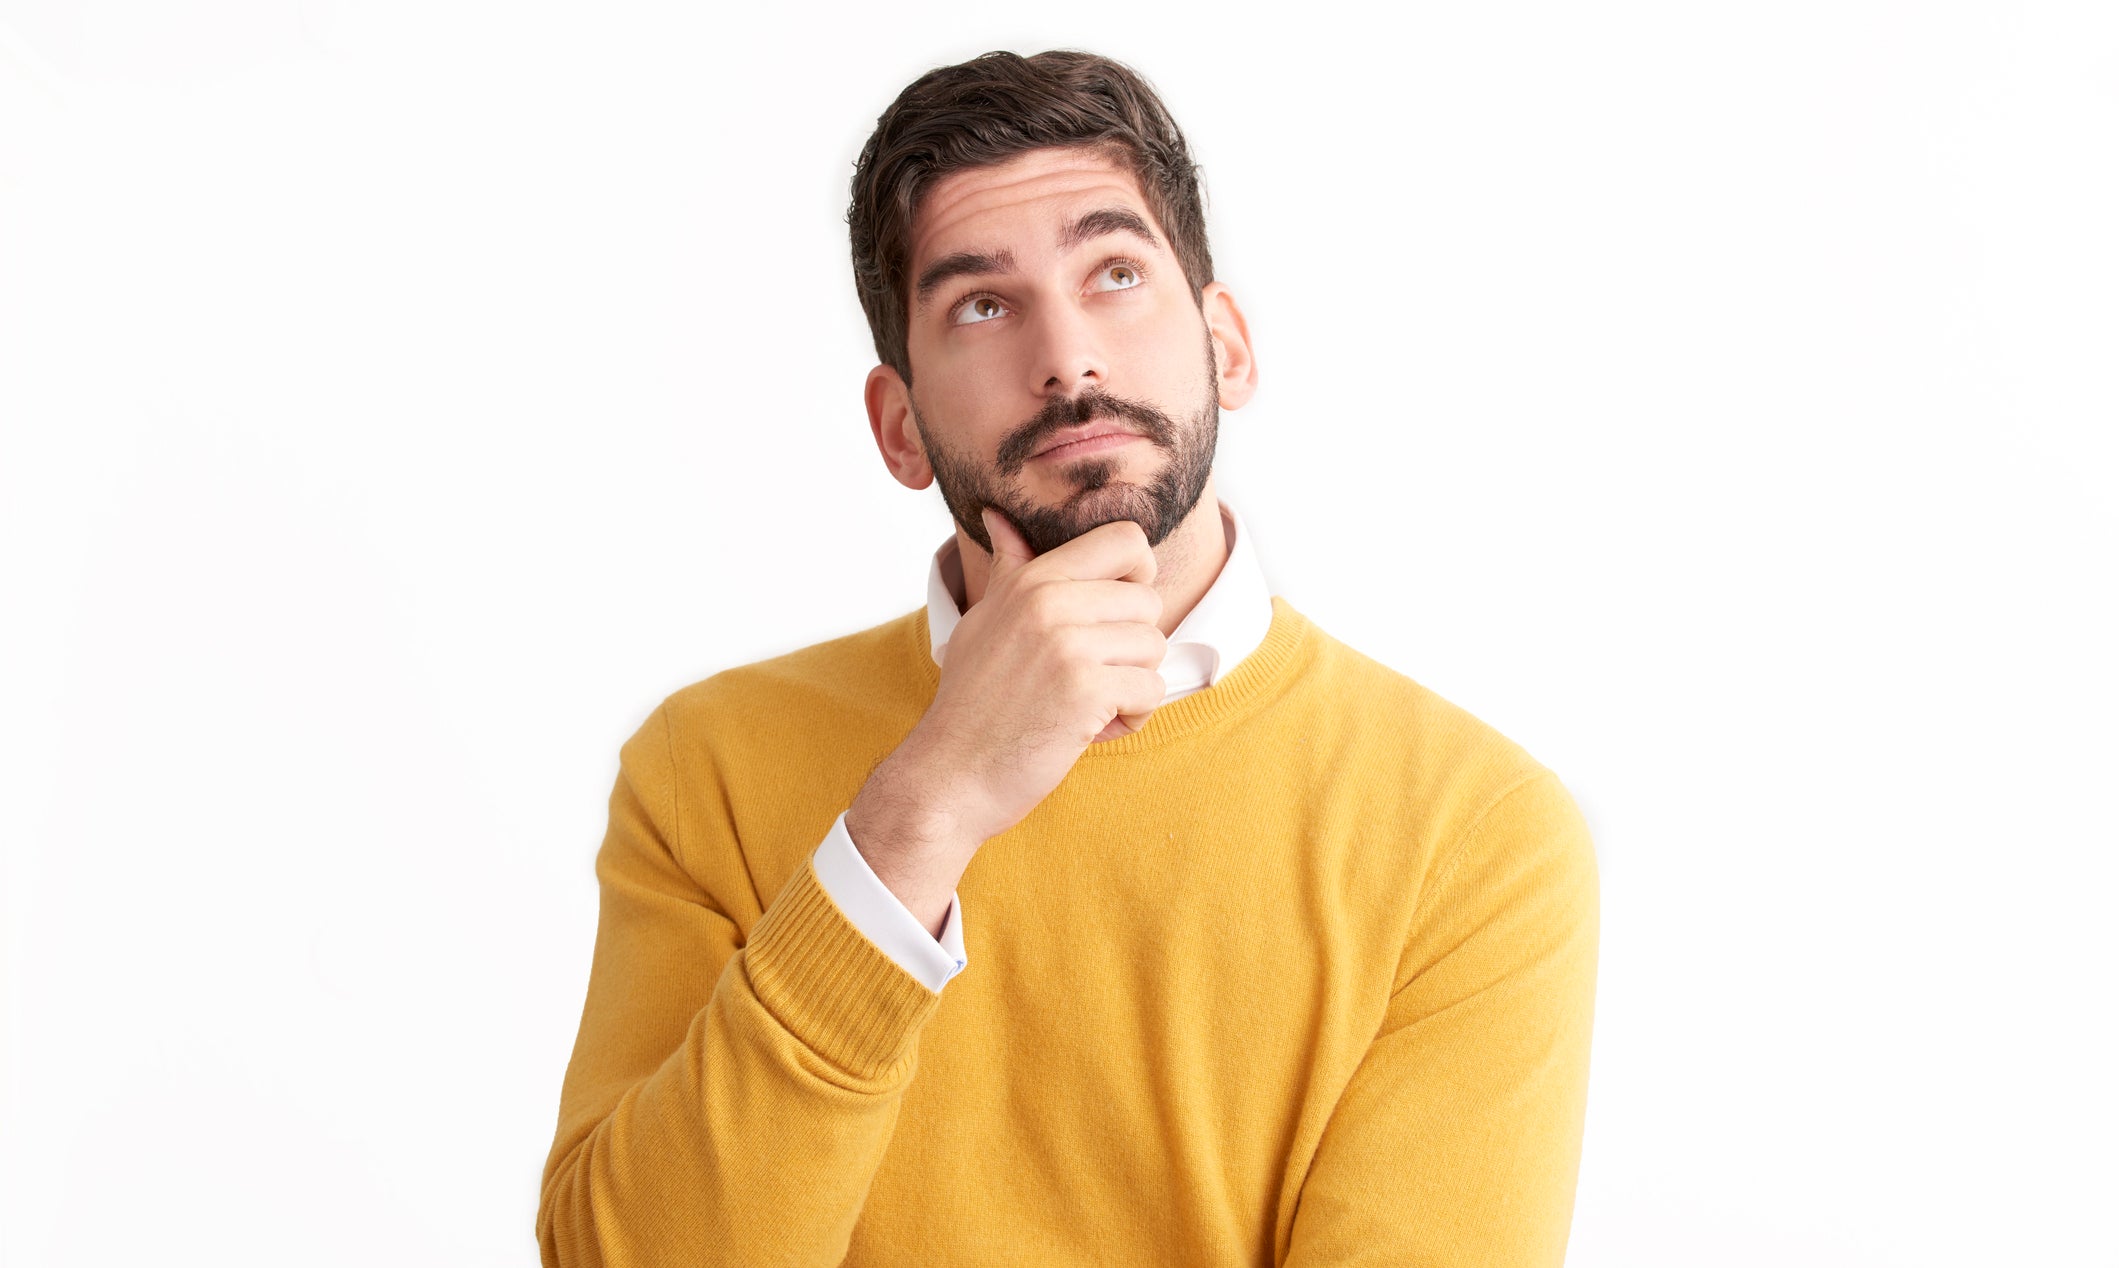 Man in yellow sweater looking up thoughtfully with hand on chin